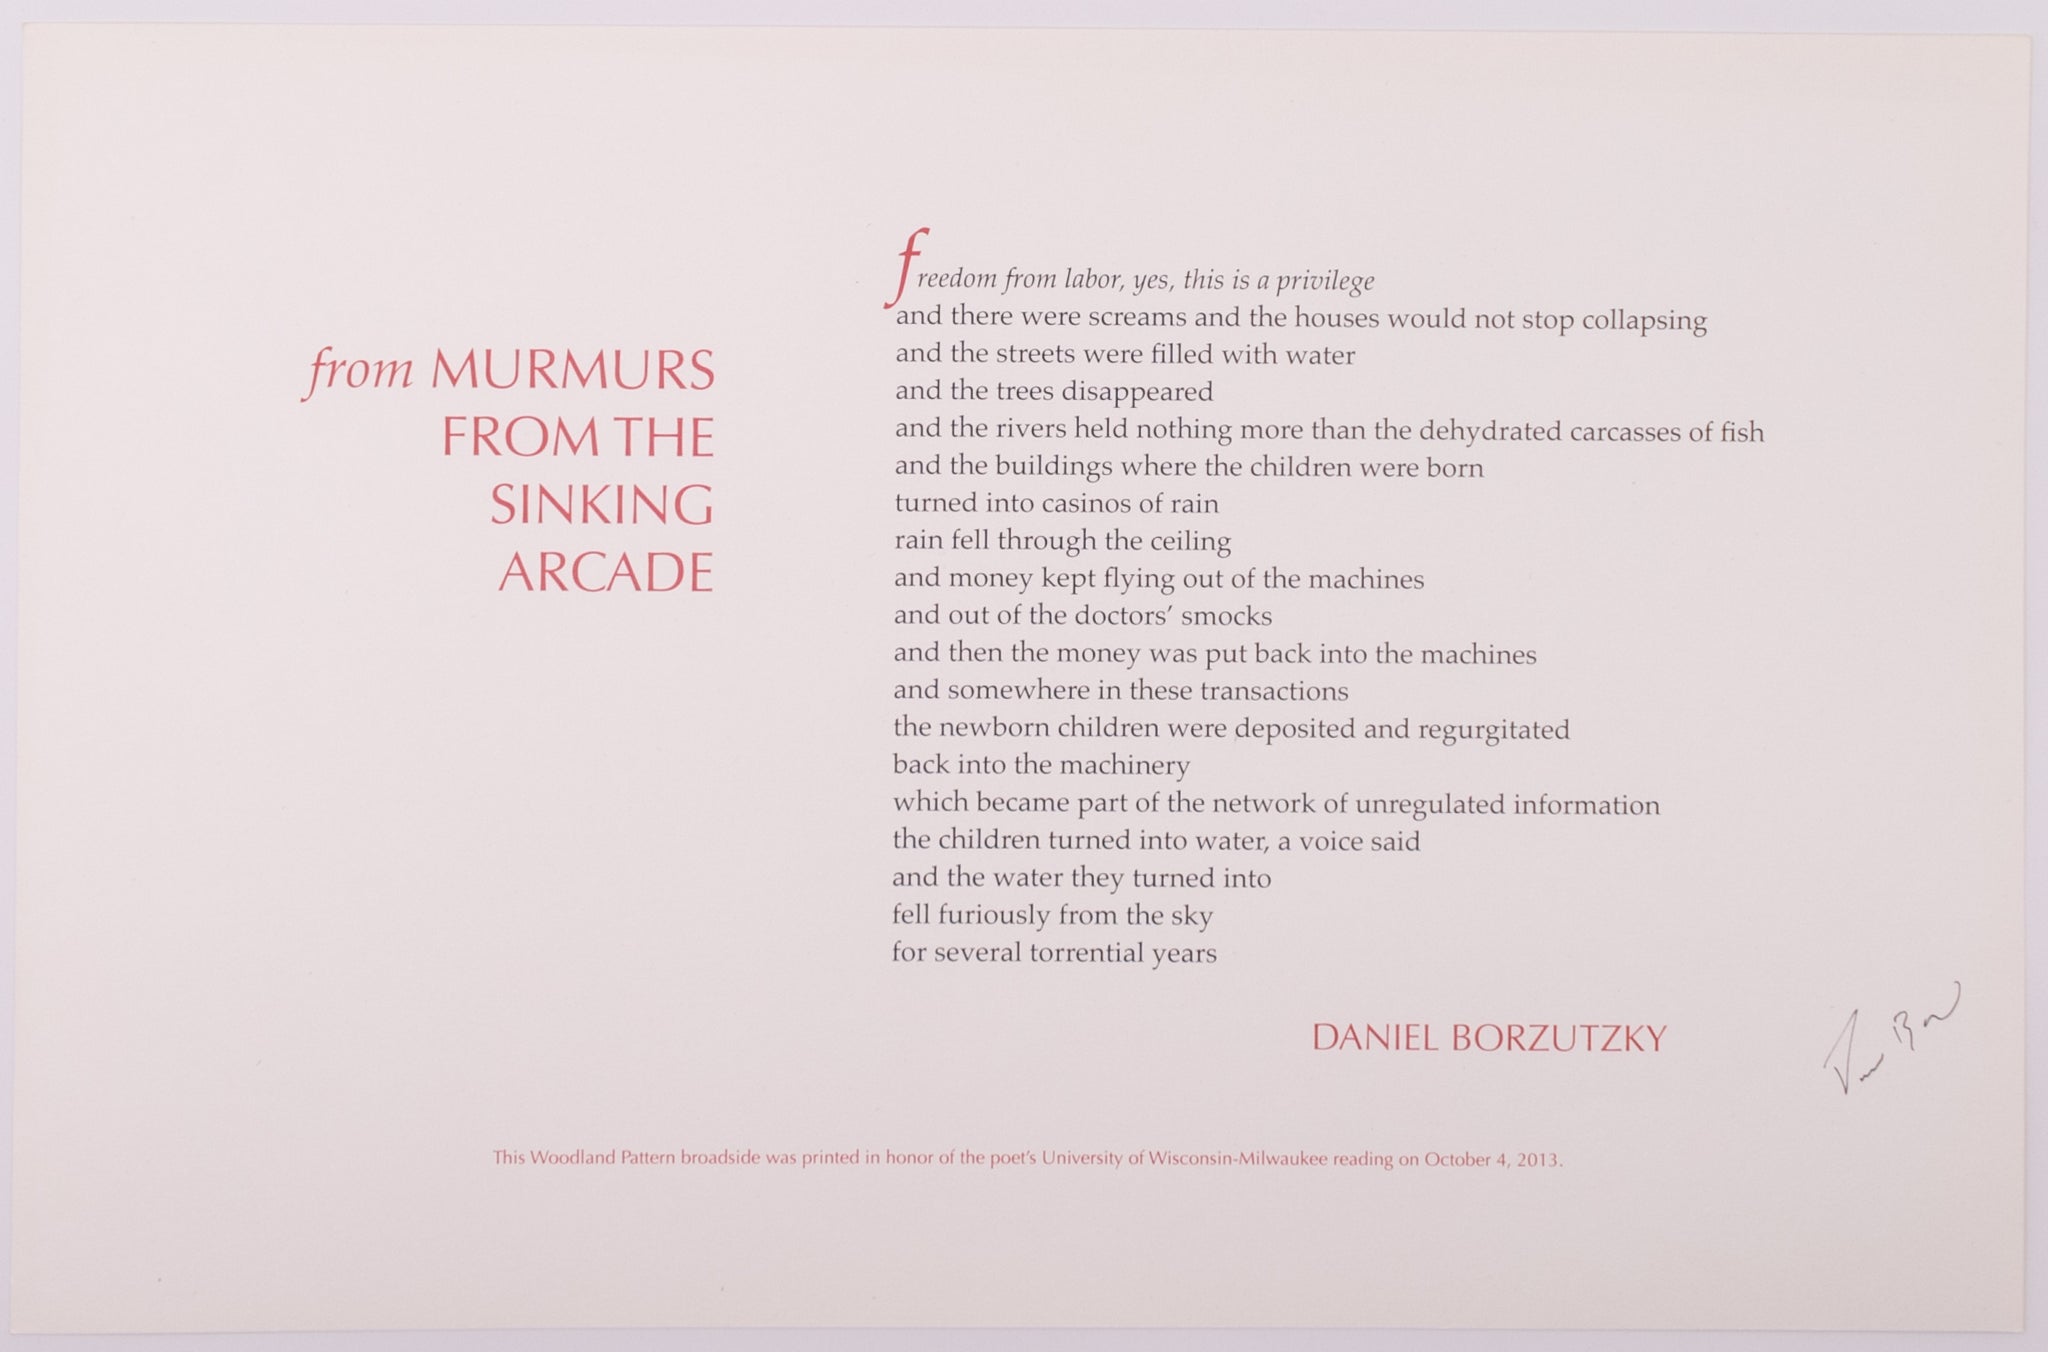 from Murmurs from the Sinking Arcade by Daniel Borzutzky